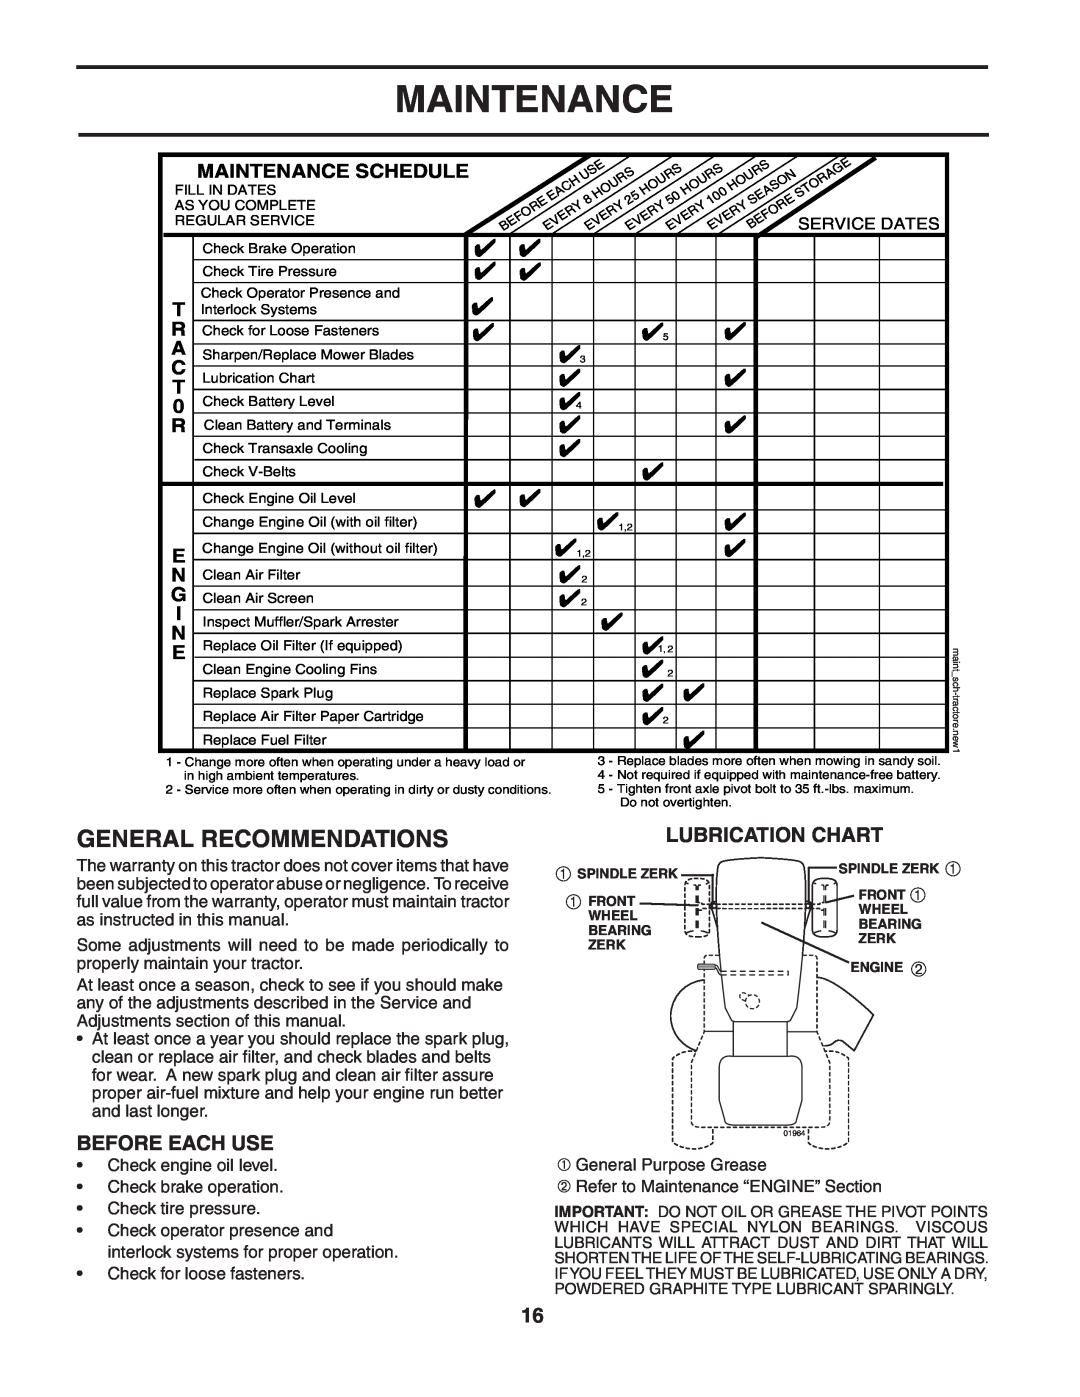 Husqvarna YTH2248 owner manual General Recommendations, Before Each Use, Lubrication Chart, Maintenance Schedule 